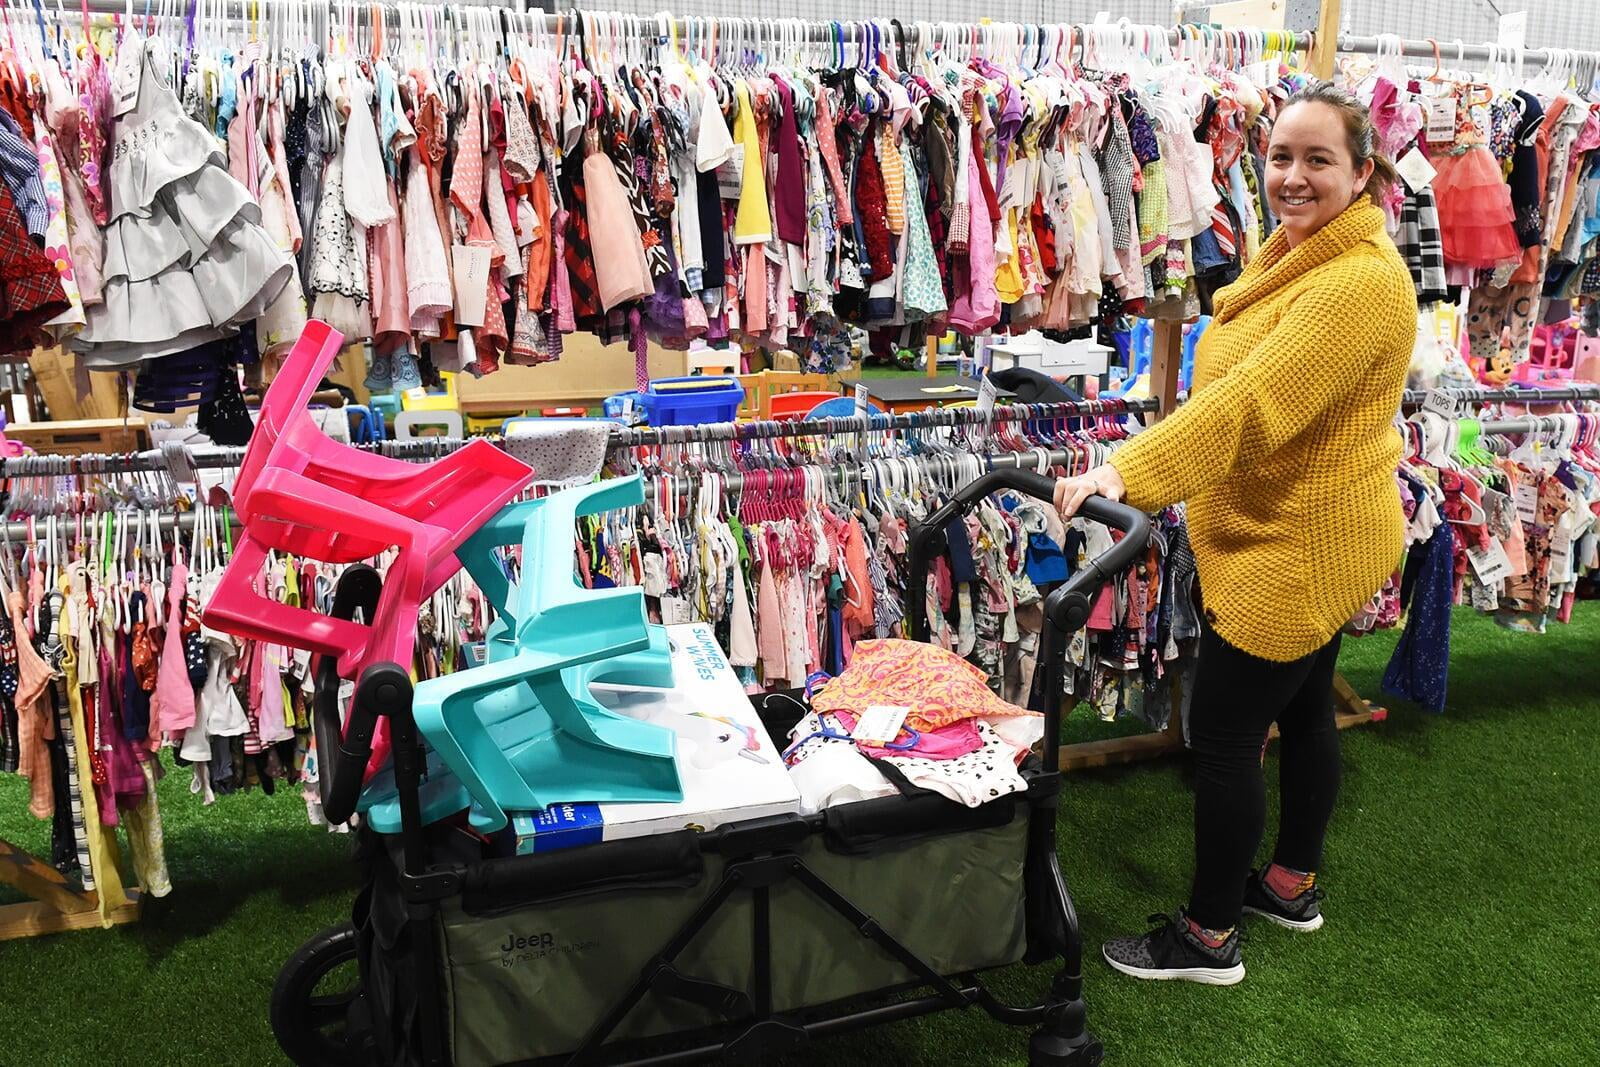 Two friends shop together—one mom wears her baby girl—as they find great deals at their local JBF sale.